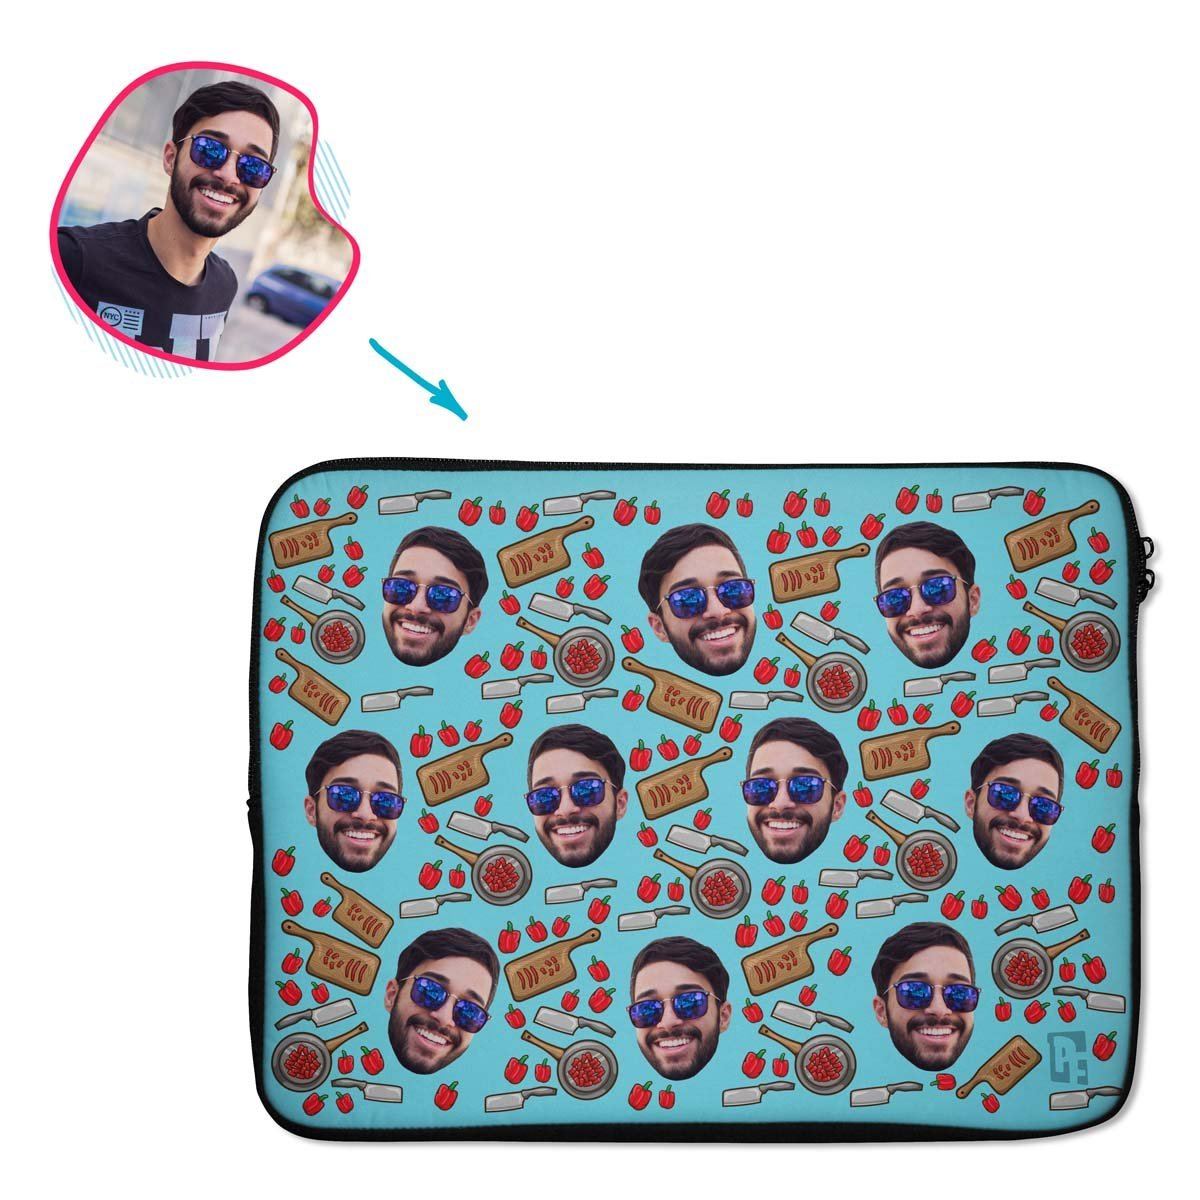 Сooking Personalized Laptop Sleeve